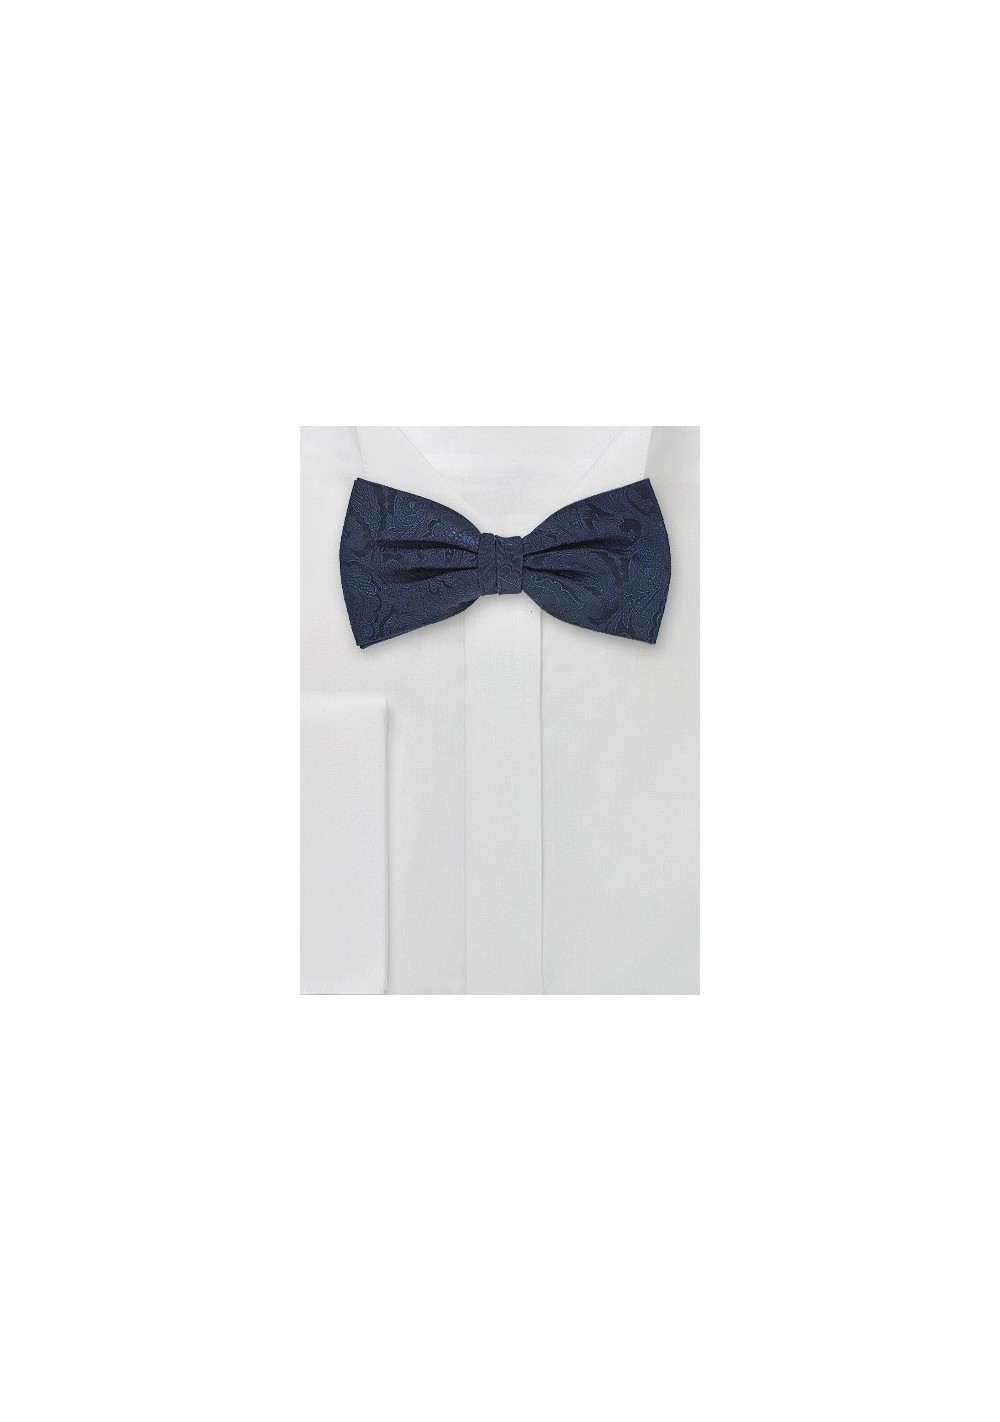 Paisley Bow Tie in Midnight Blue